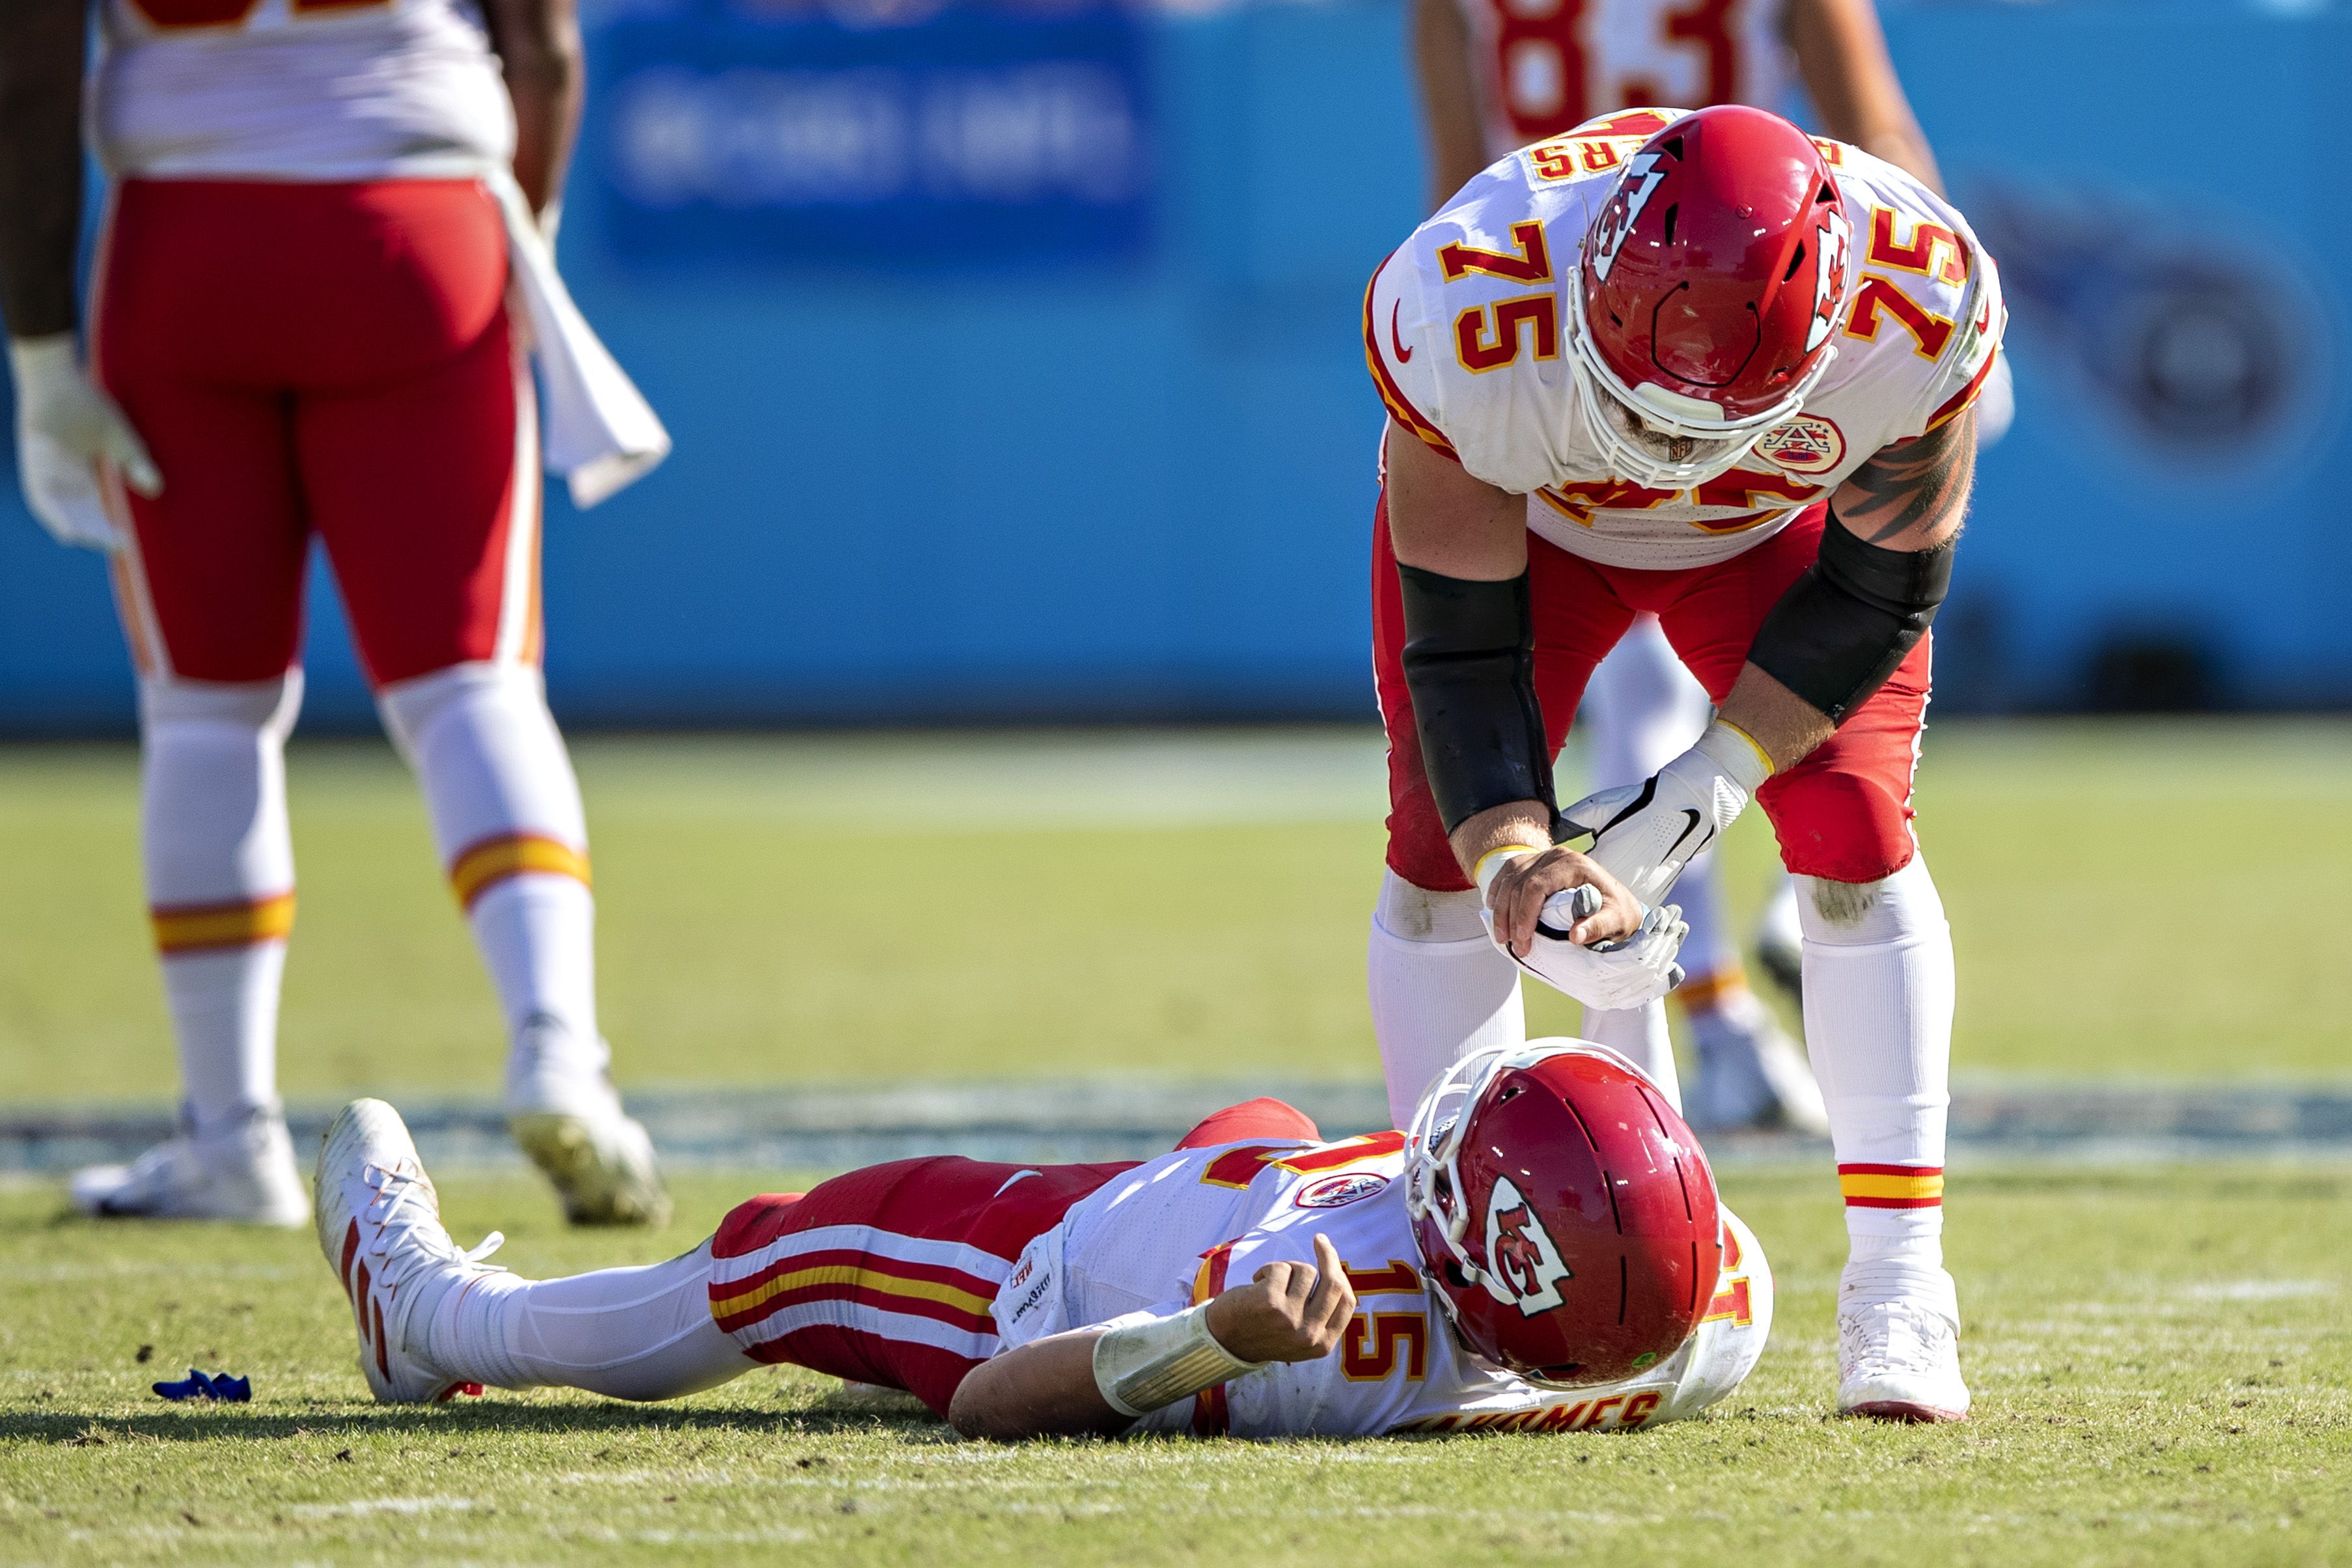 Chiefs offensive lineman Mike Remmers helps up Patrick Mahomes